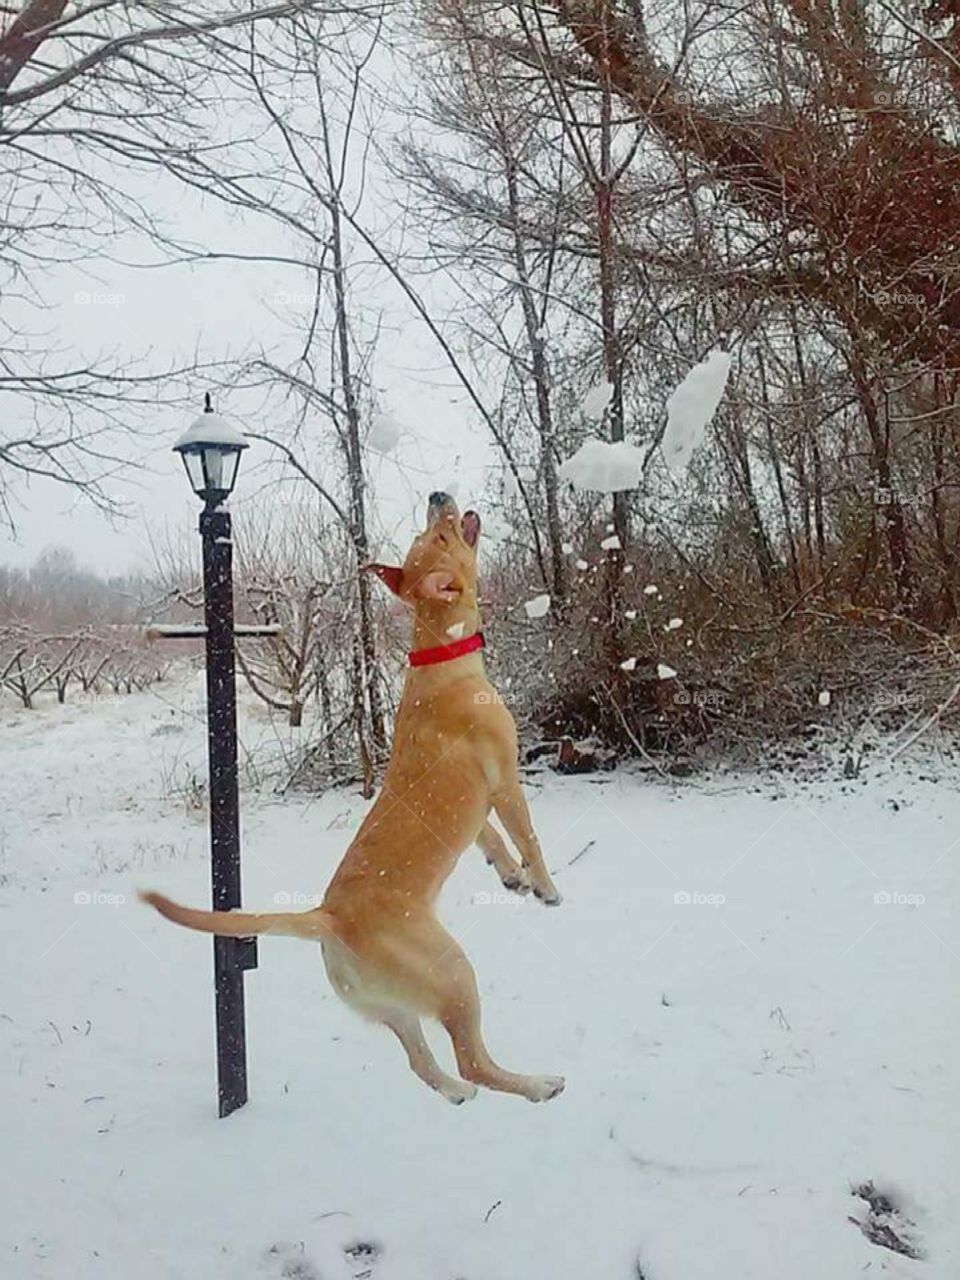 Lucy my pet catching a snowball